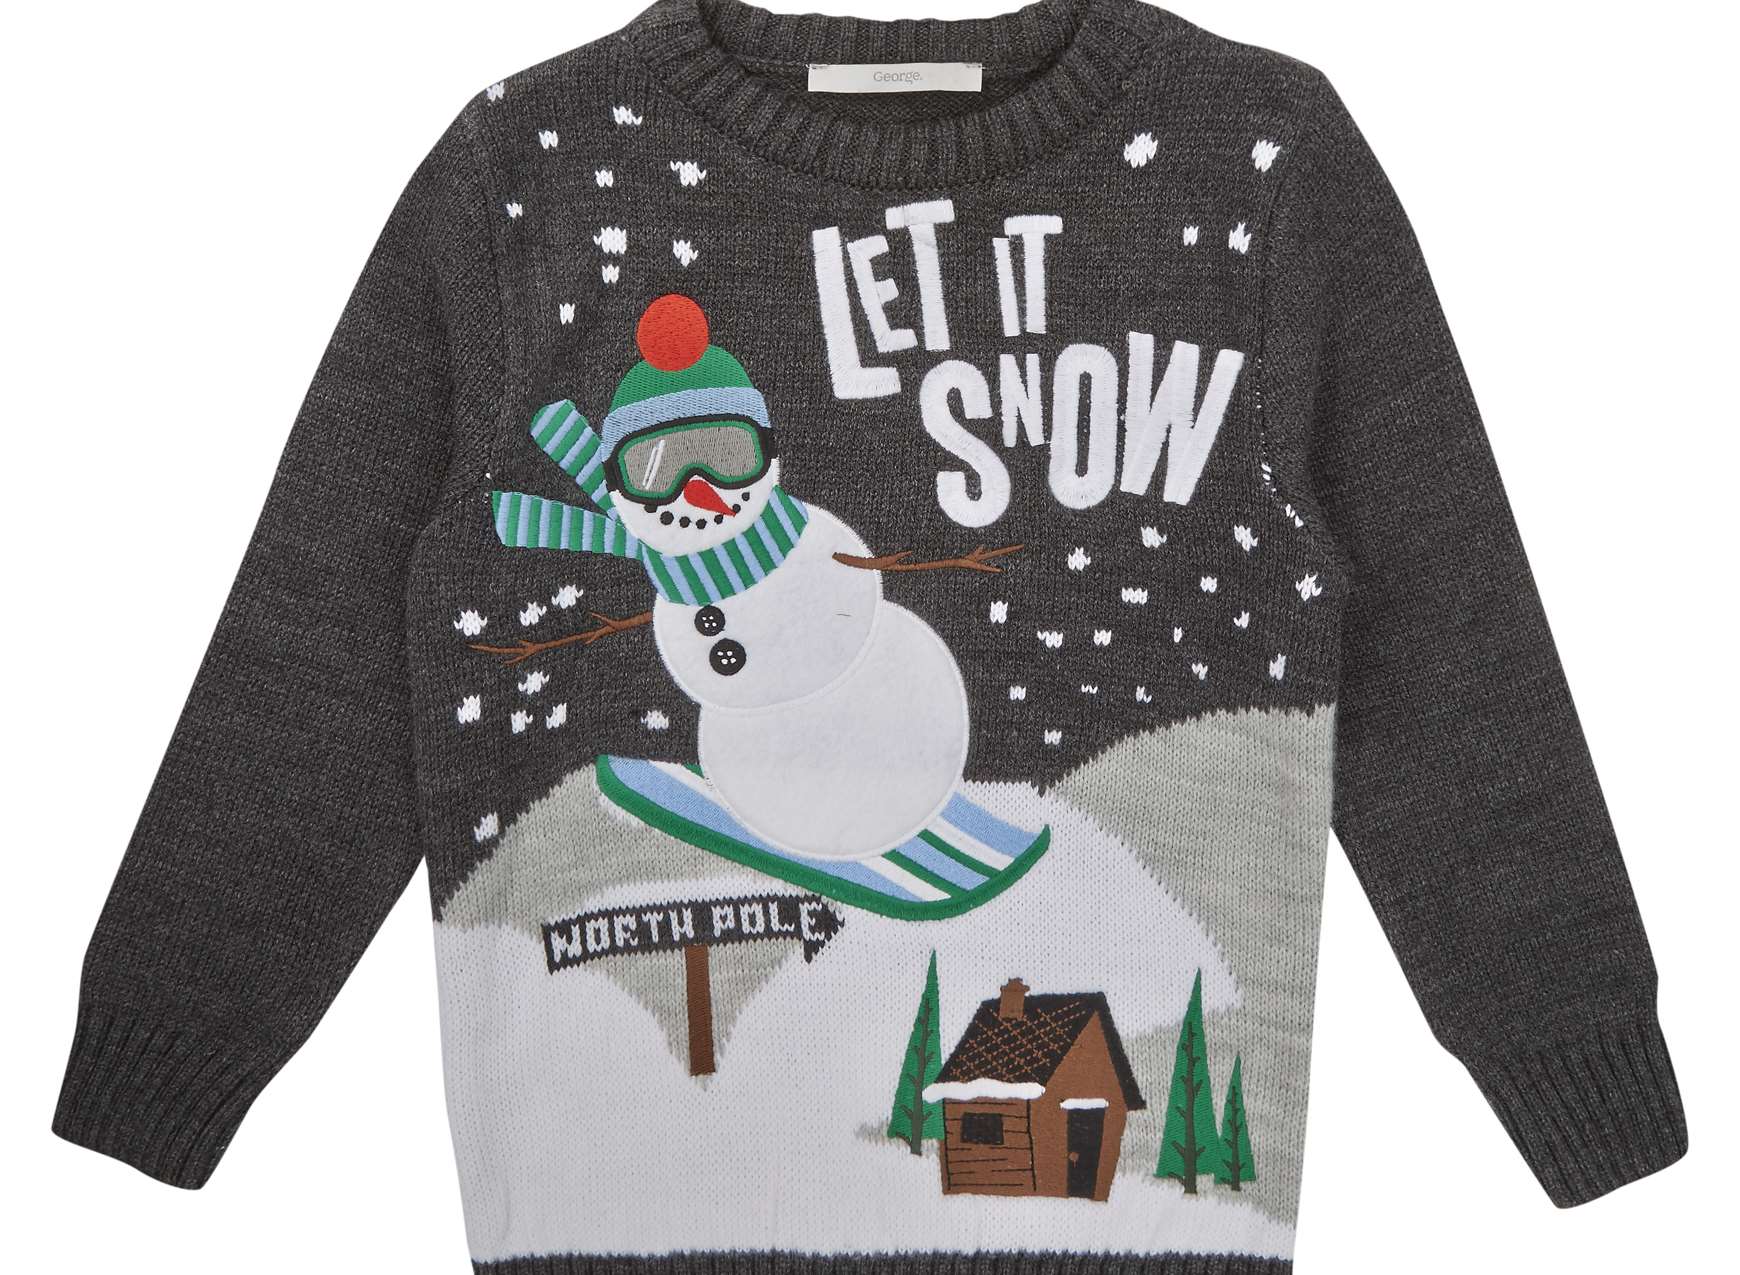 Let It Snow children's jumper from George at Asda. Prices start at £7.